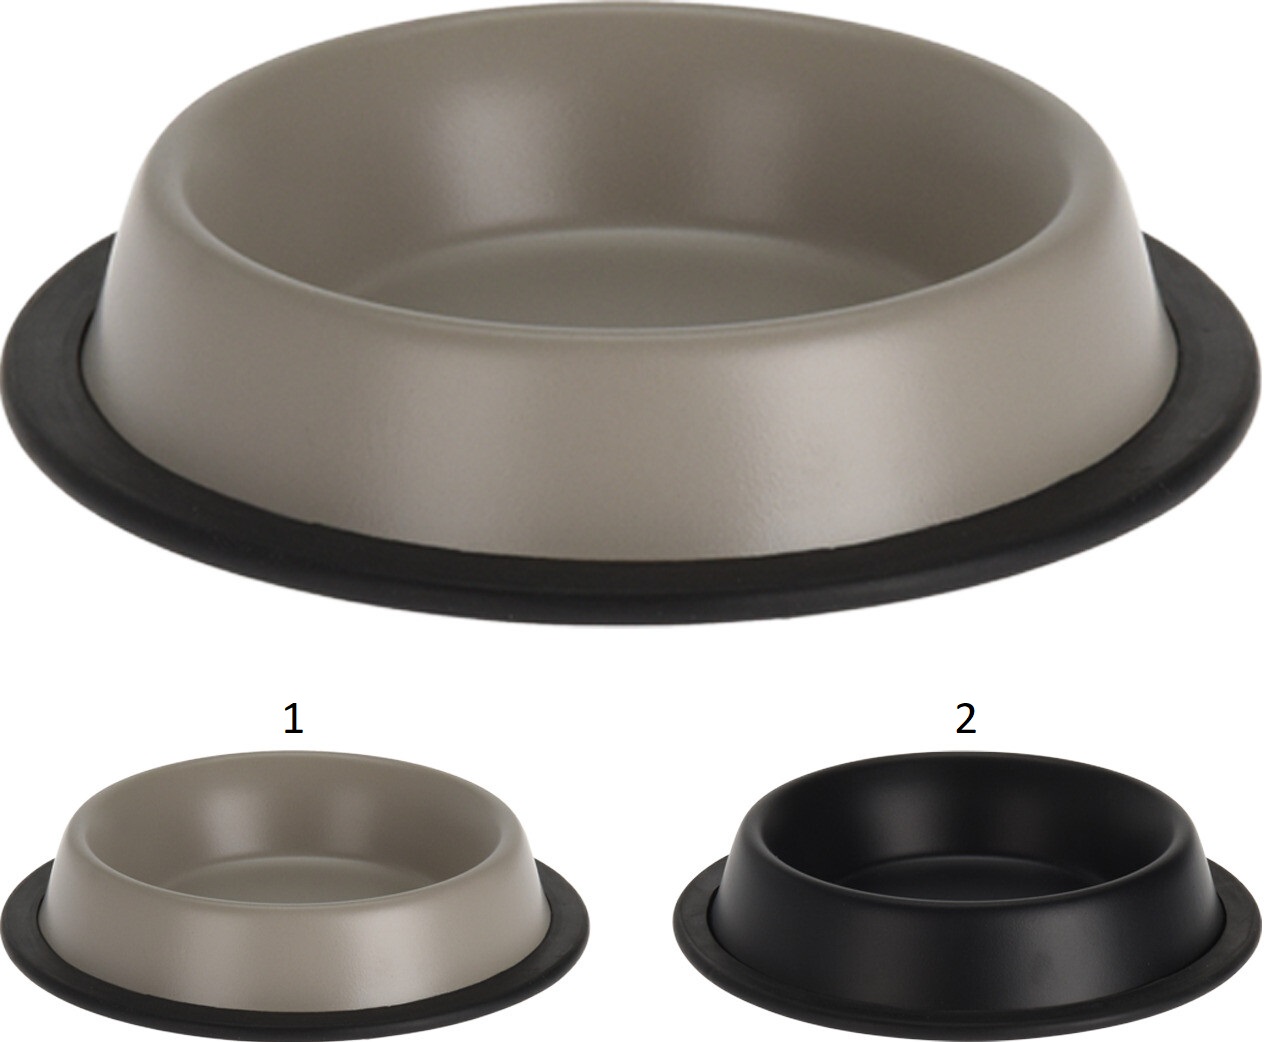 DOG BOWL STAINLESS STEEL 255MM 2 ASSORTED COLORS